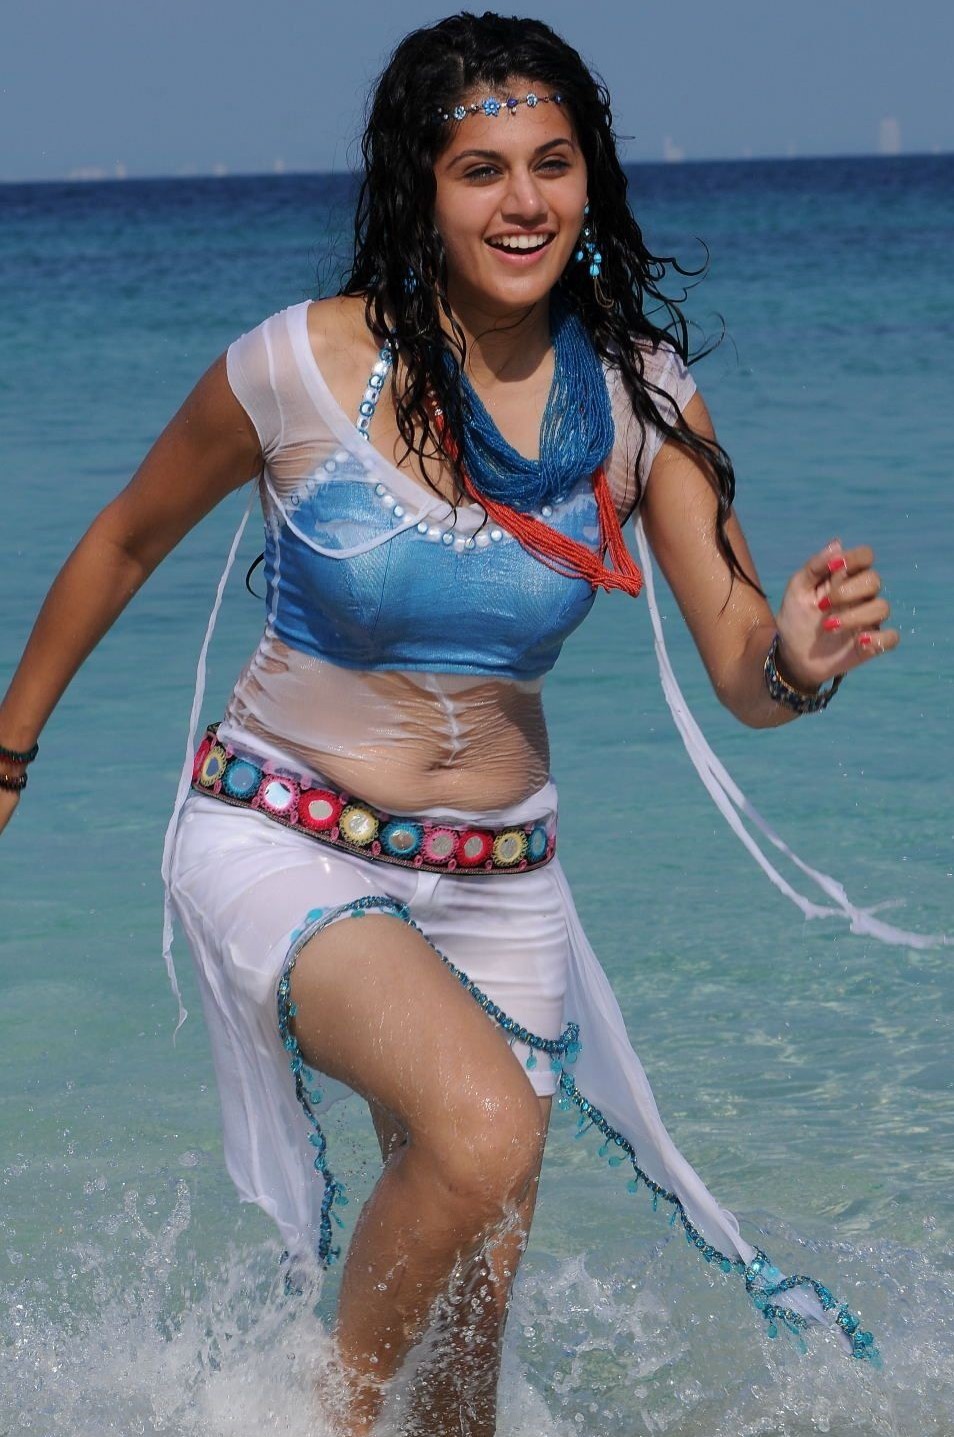 Actresses, Beautiful Indian Celebrities, Hottest Indian Celebrities, Hottest Indian Girls, Hottest Indian Women, Indian Actresses, Indian celebrities, Leo Actresses, Leo Celebrities, Leo Models, Taapsee Pannu age, Taapsee Pannu Body Statistics, Taapsee Pannu height, Taapsee Pannu Measurements, Taapsee Pannu weight, Zodiac Actresses, Zodiac Celebrities